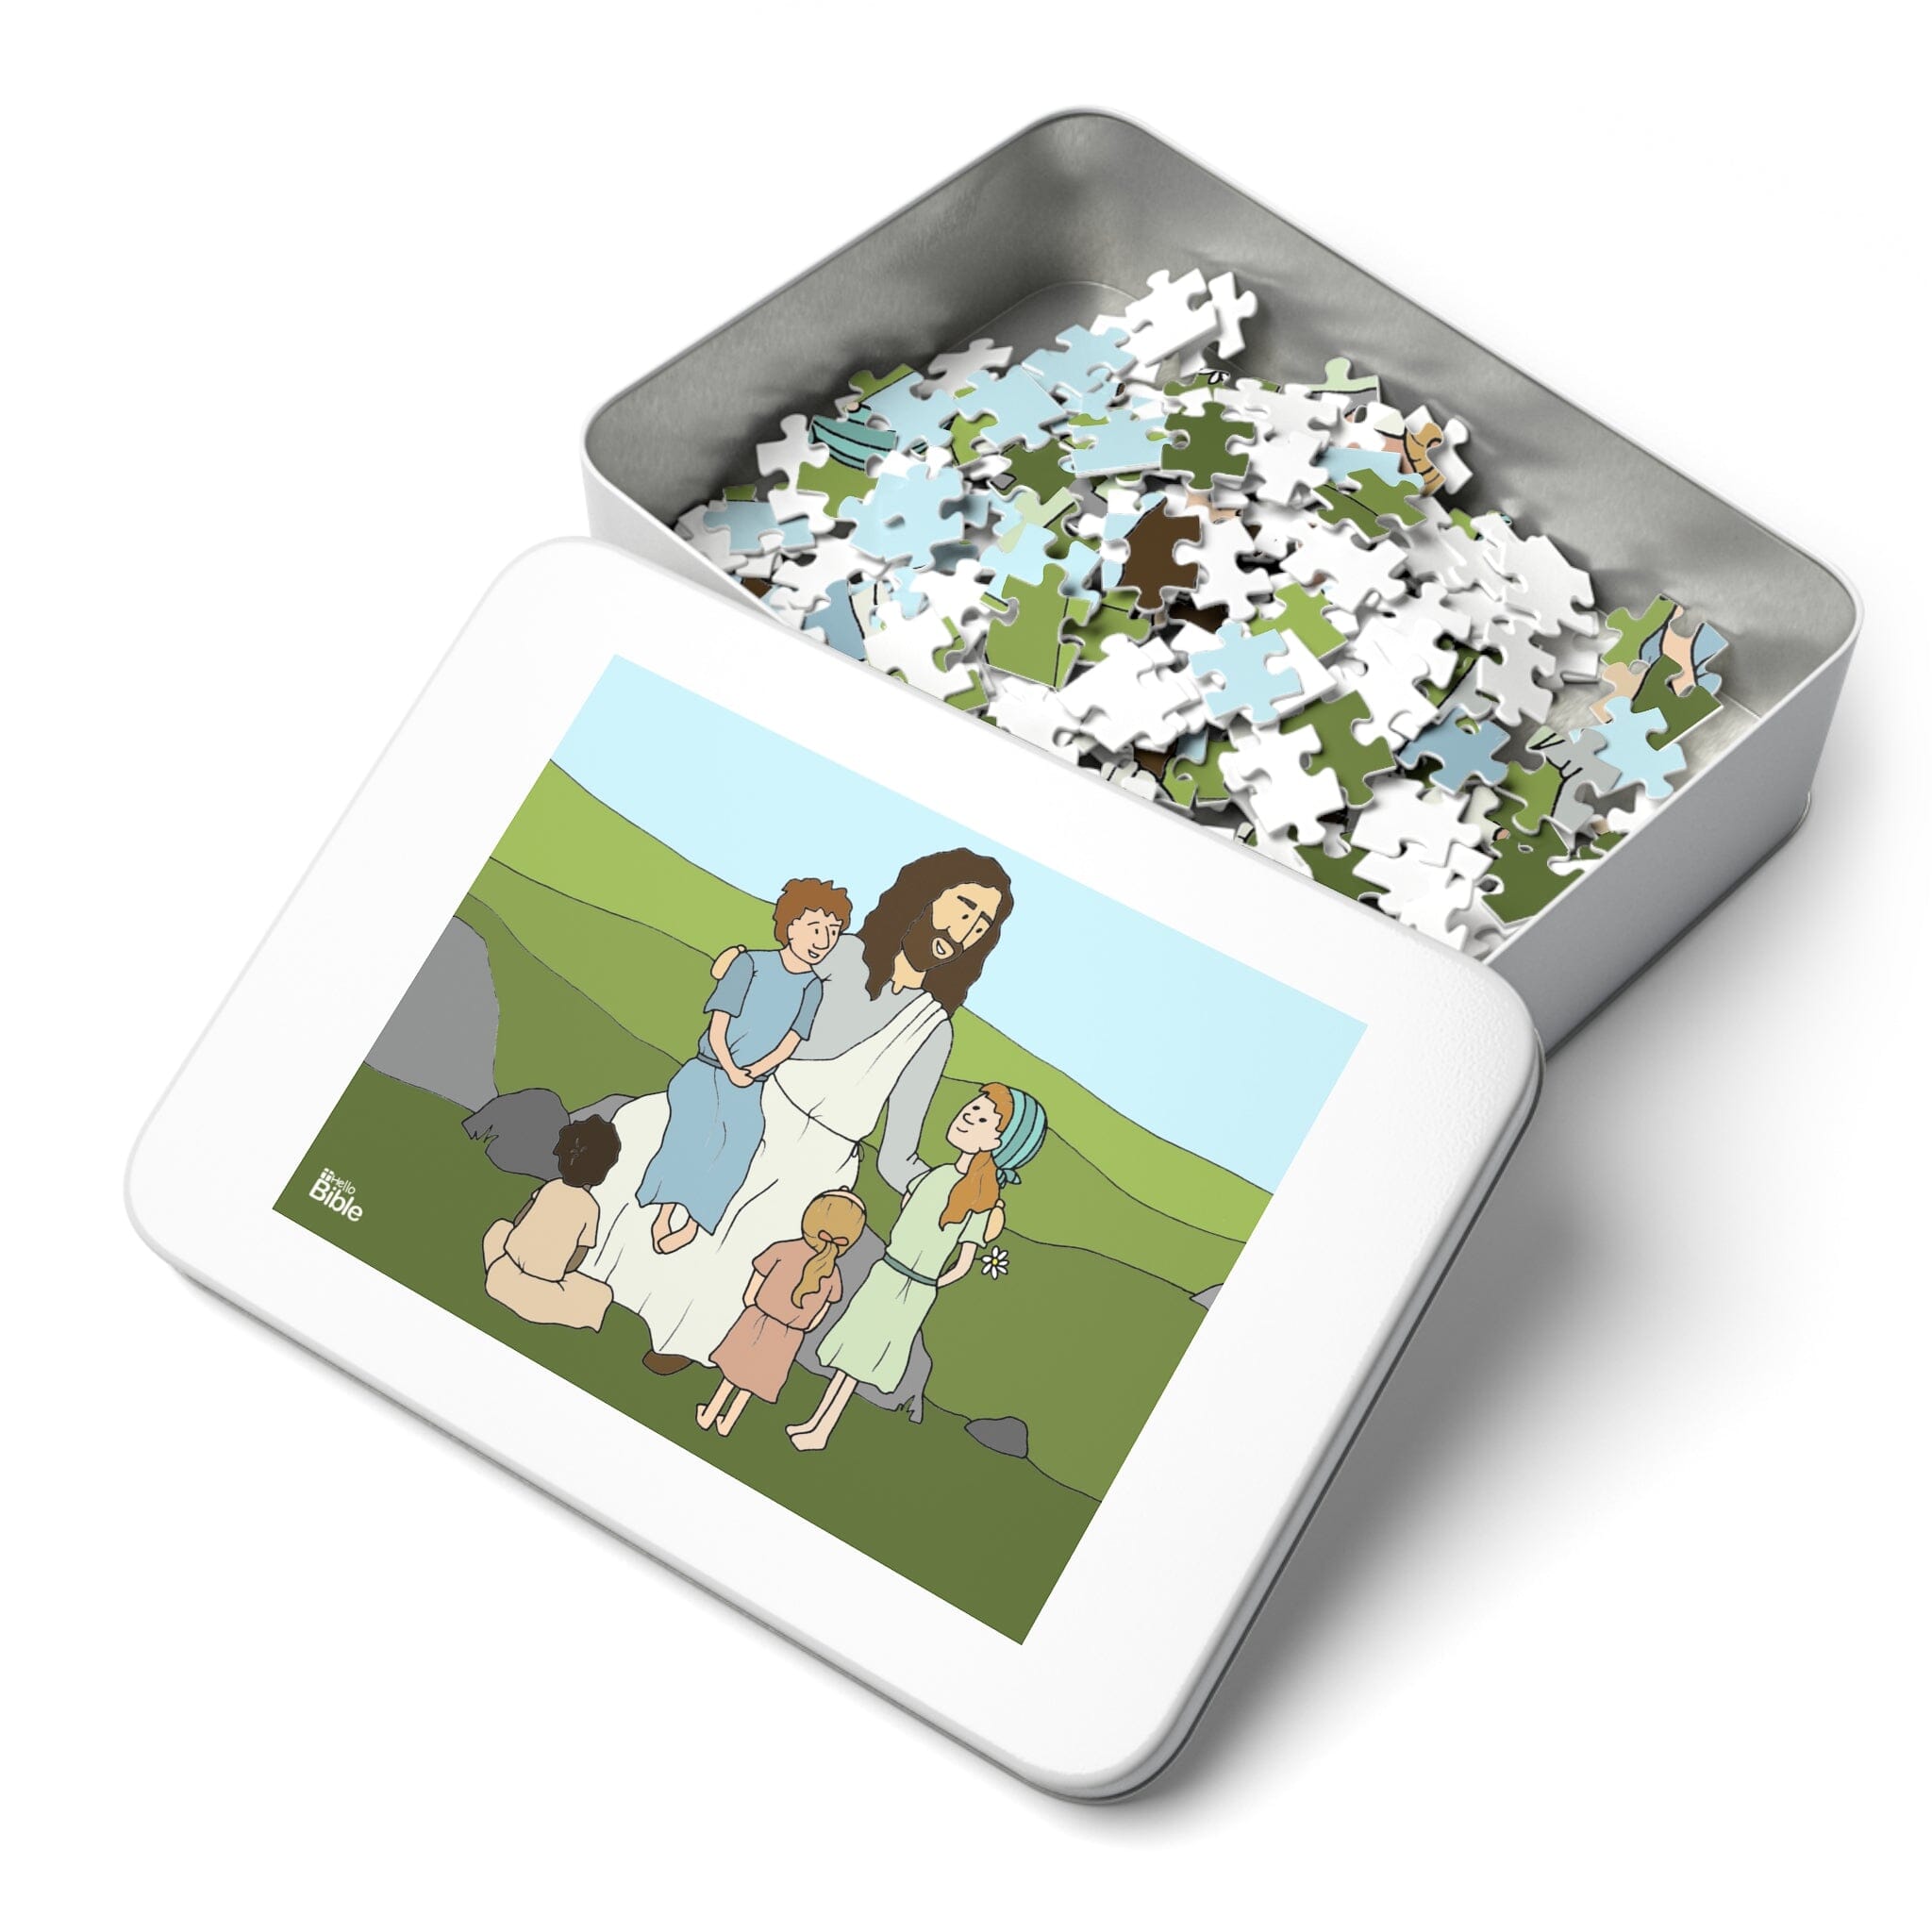 HelloBible Jesus and the Children Jigsaw Puzzle (110, 252, and 500 piece)